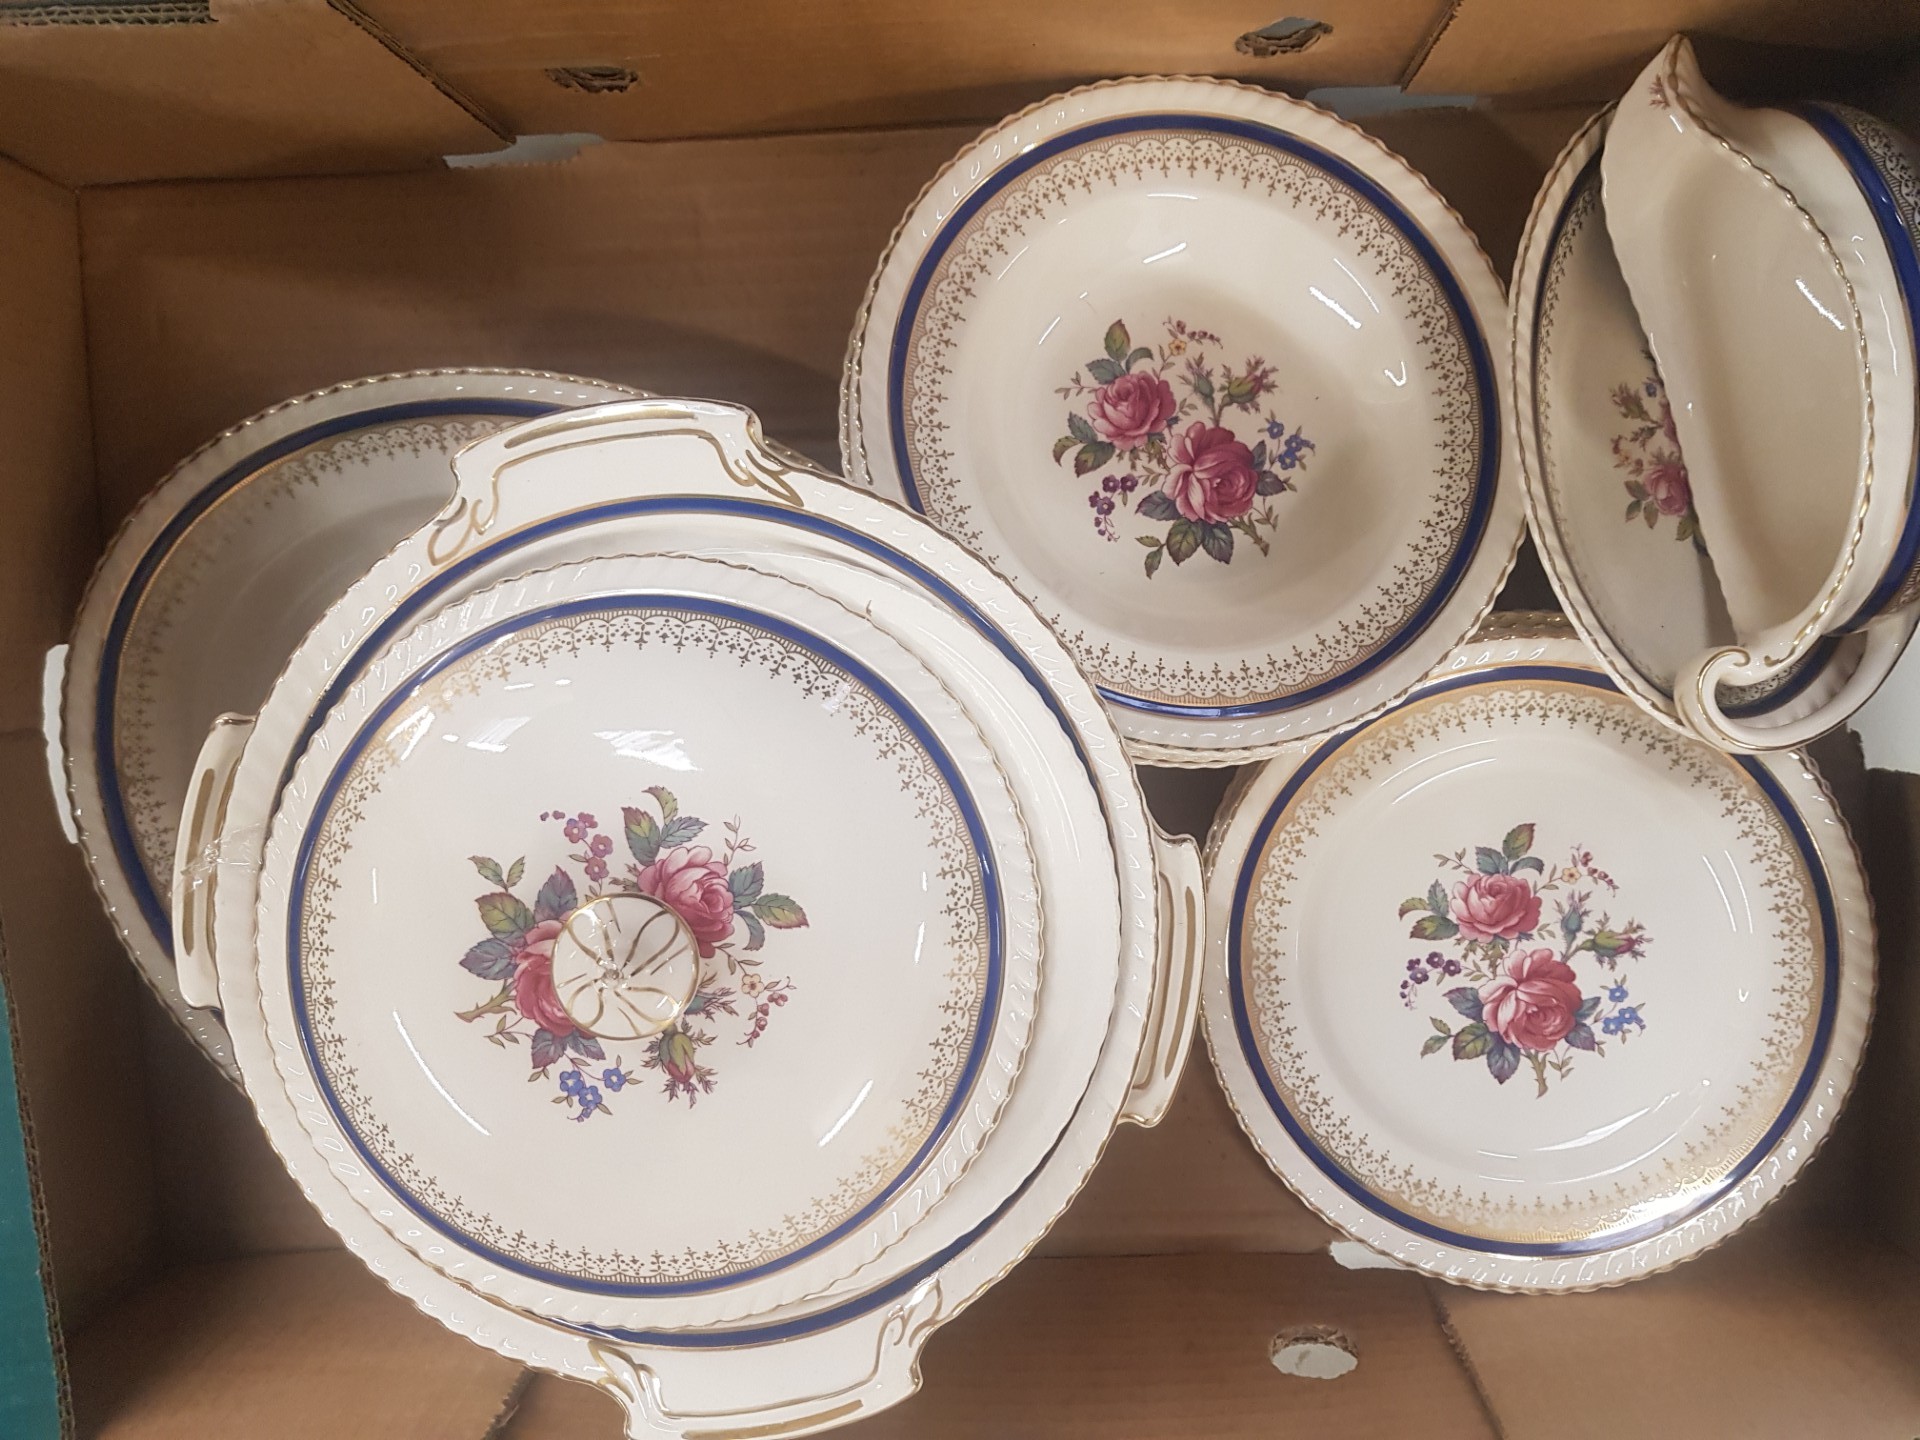 A collection of Johnson Bros. Old English pattern dinnerware to include lidded tureens, dinner